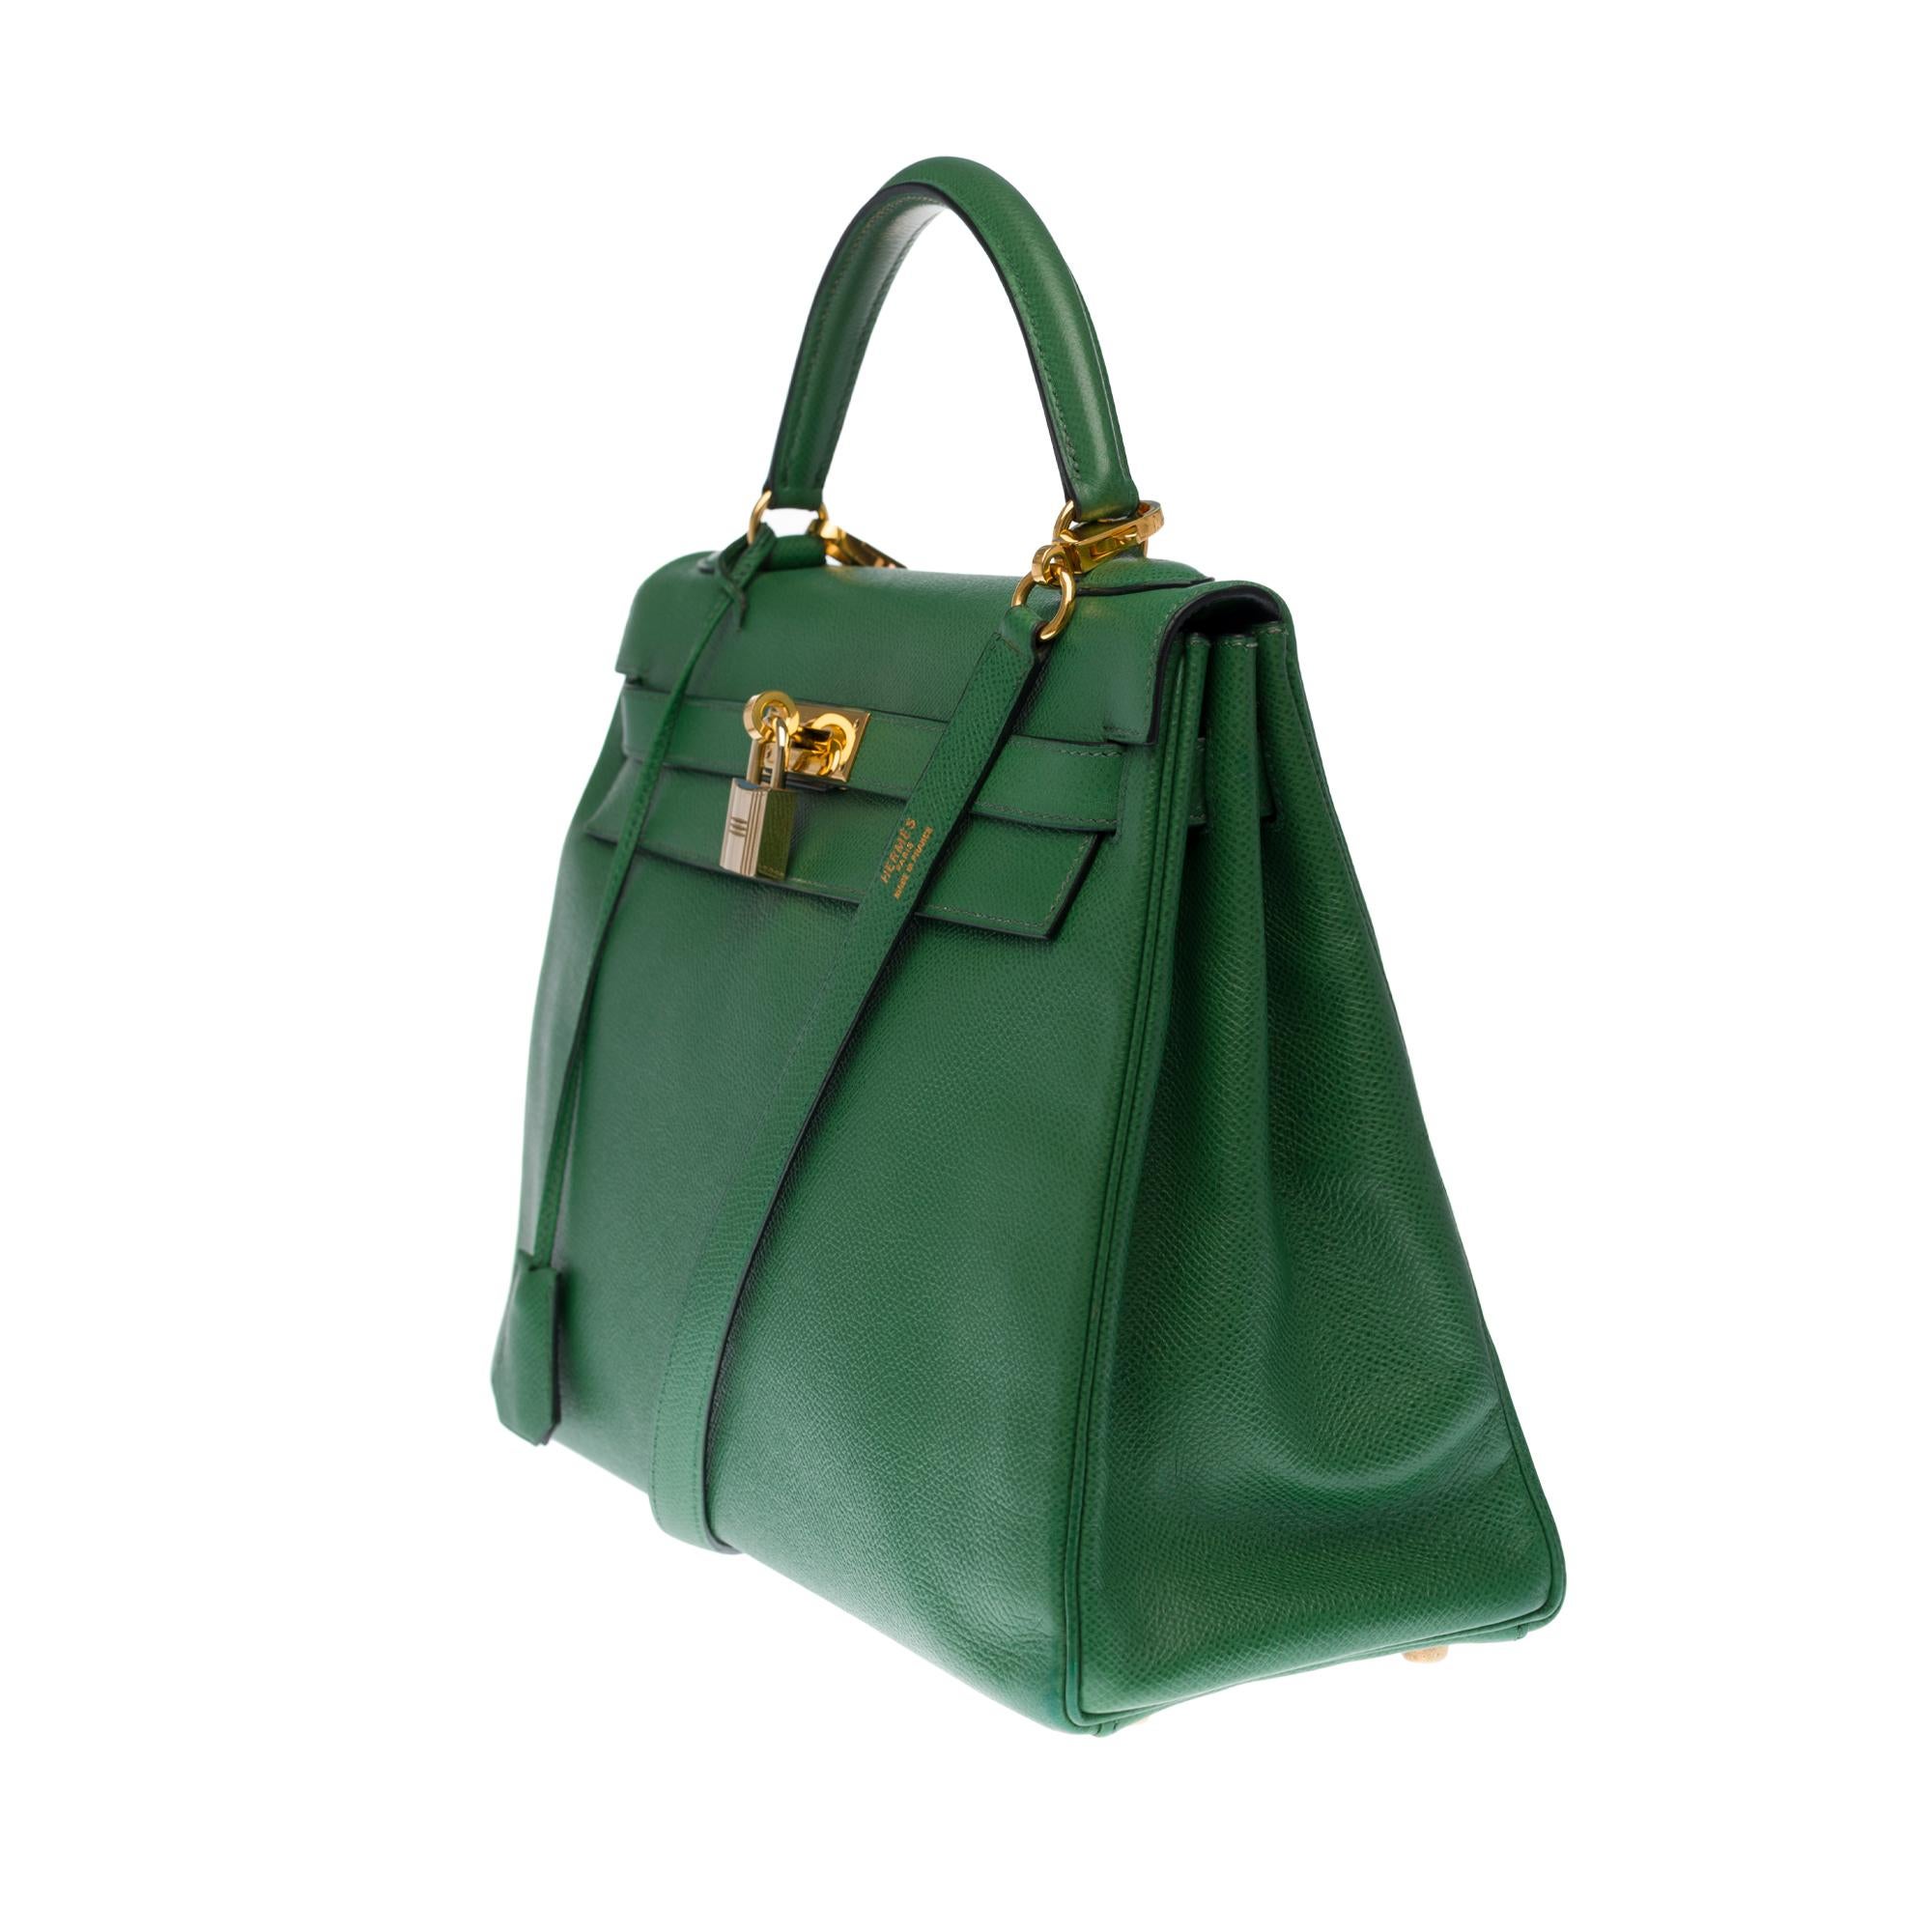 Blue RARE Hermès Kelly 32 handbag with strap in green courchevel and gold hardware